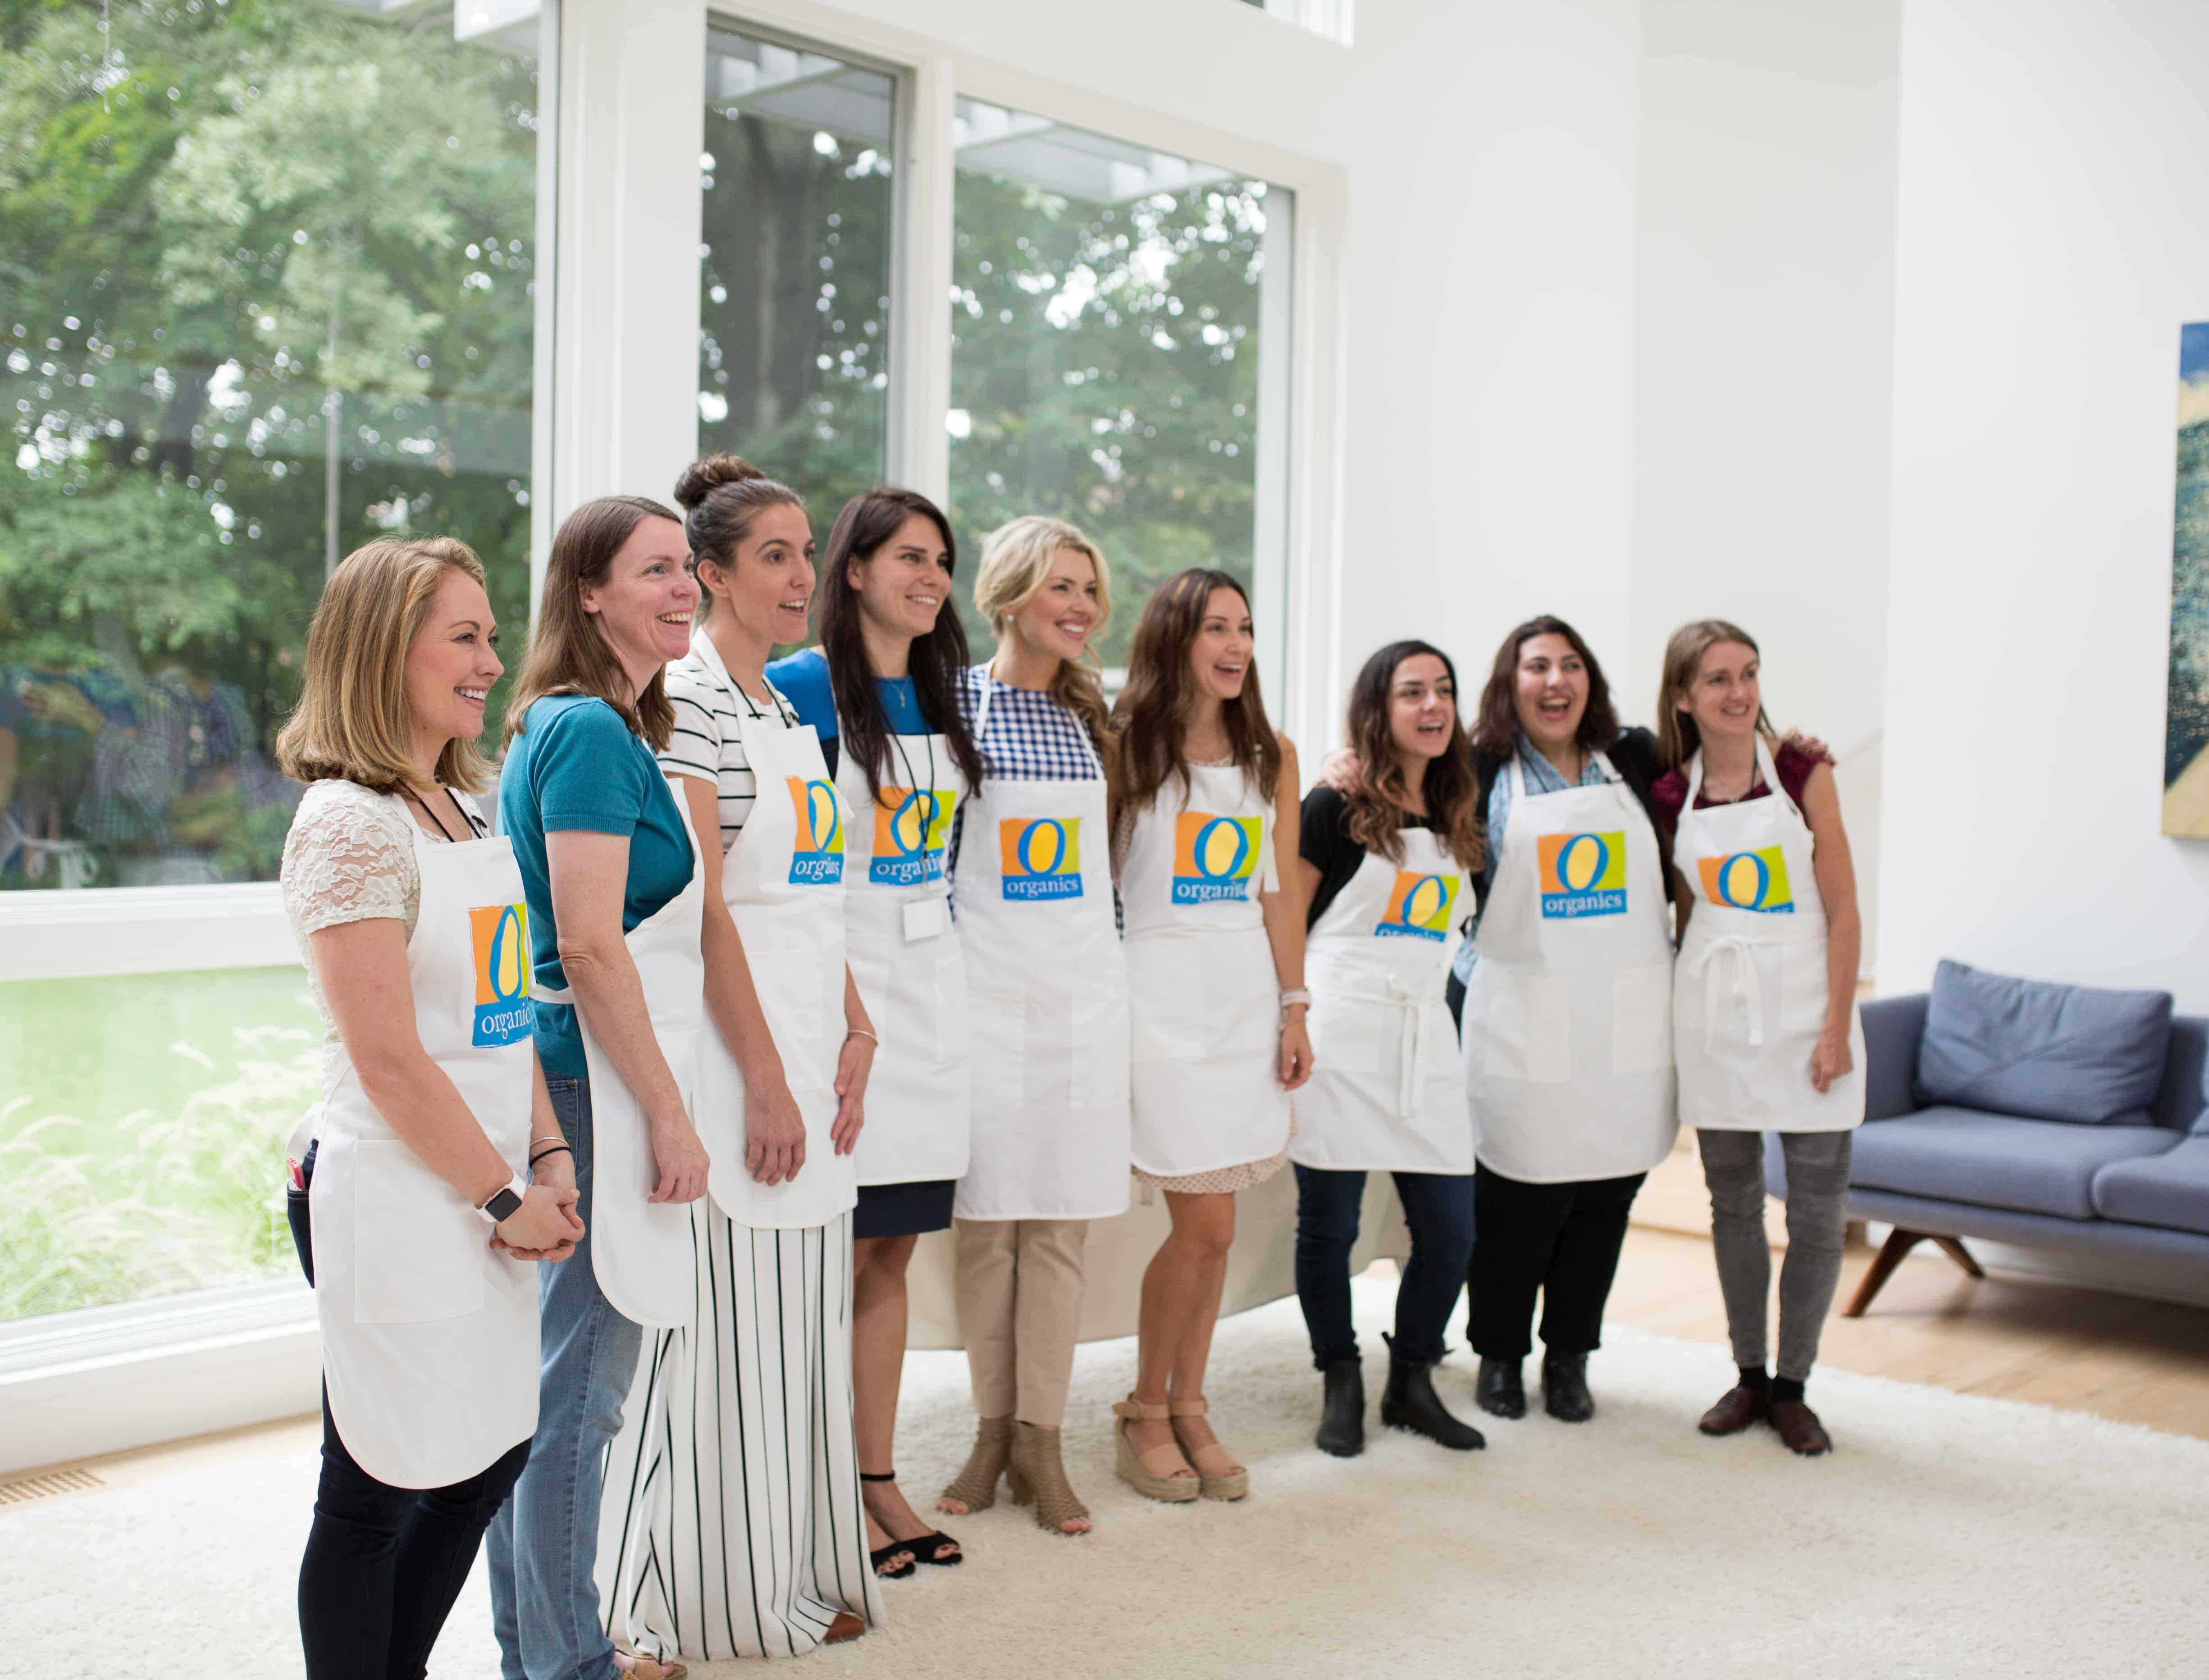 Women in matching aprons posing for a photo.